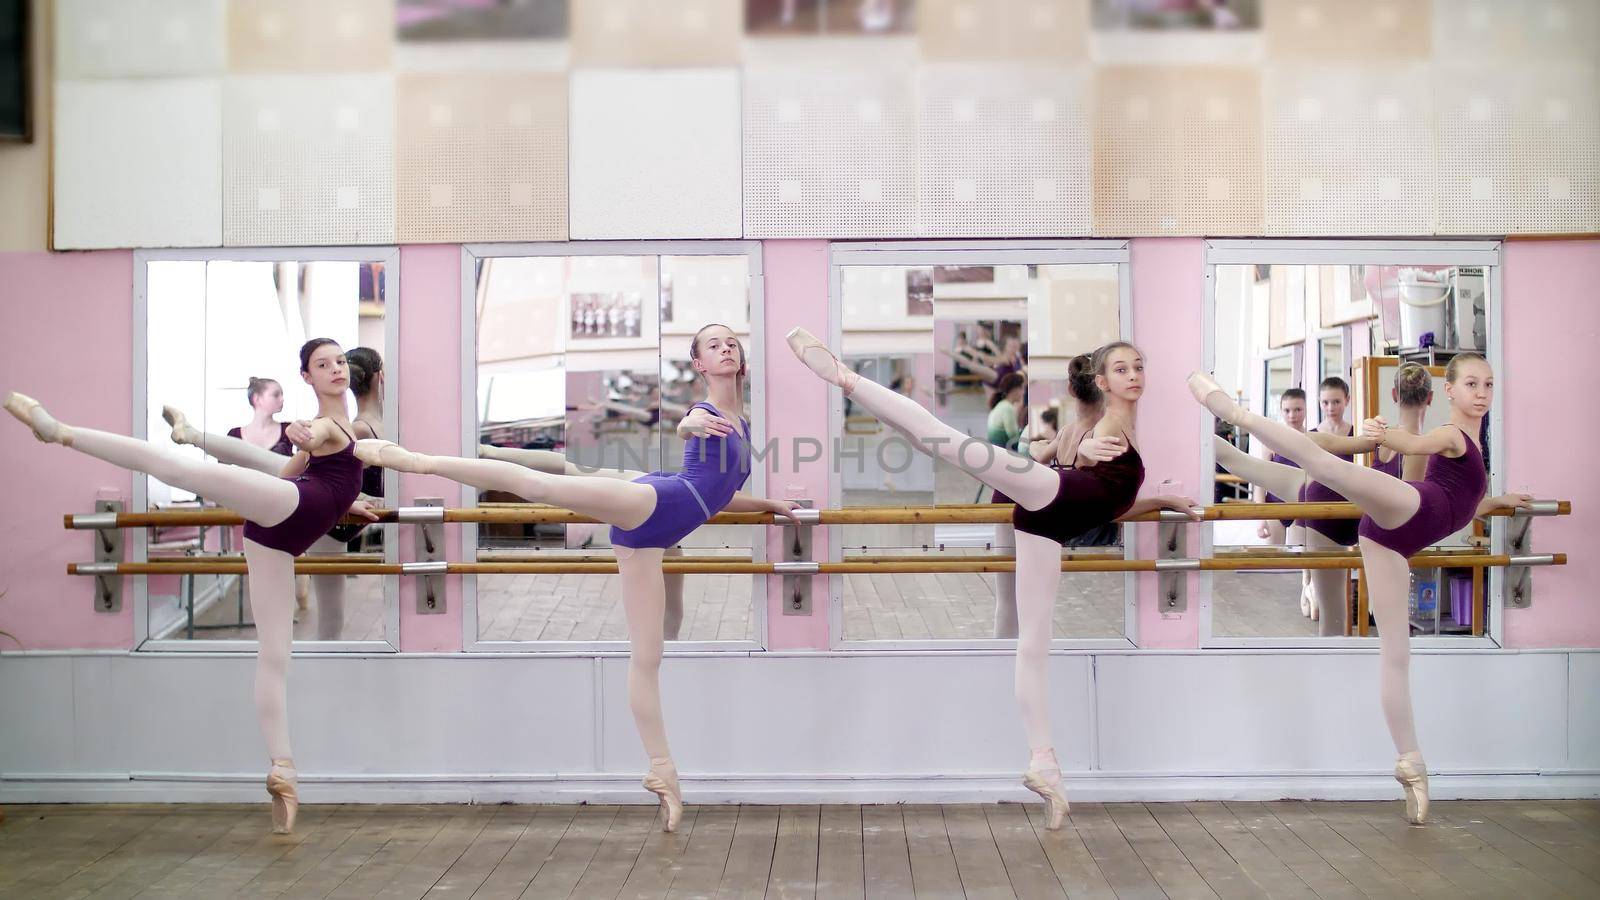 in dancing hall, Young ballerinas in purple leotards perform attitude efface on pointe shoes, standing near barre at mirror in ballet class. by djtreneryay